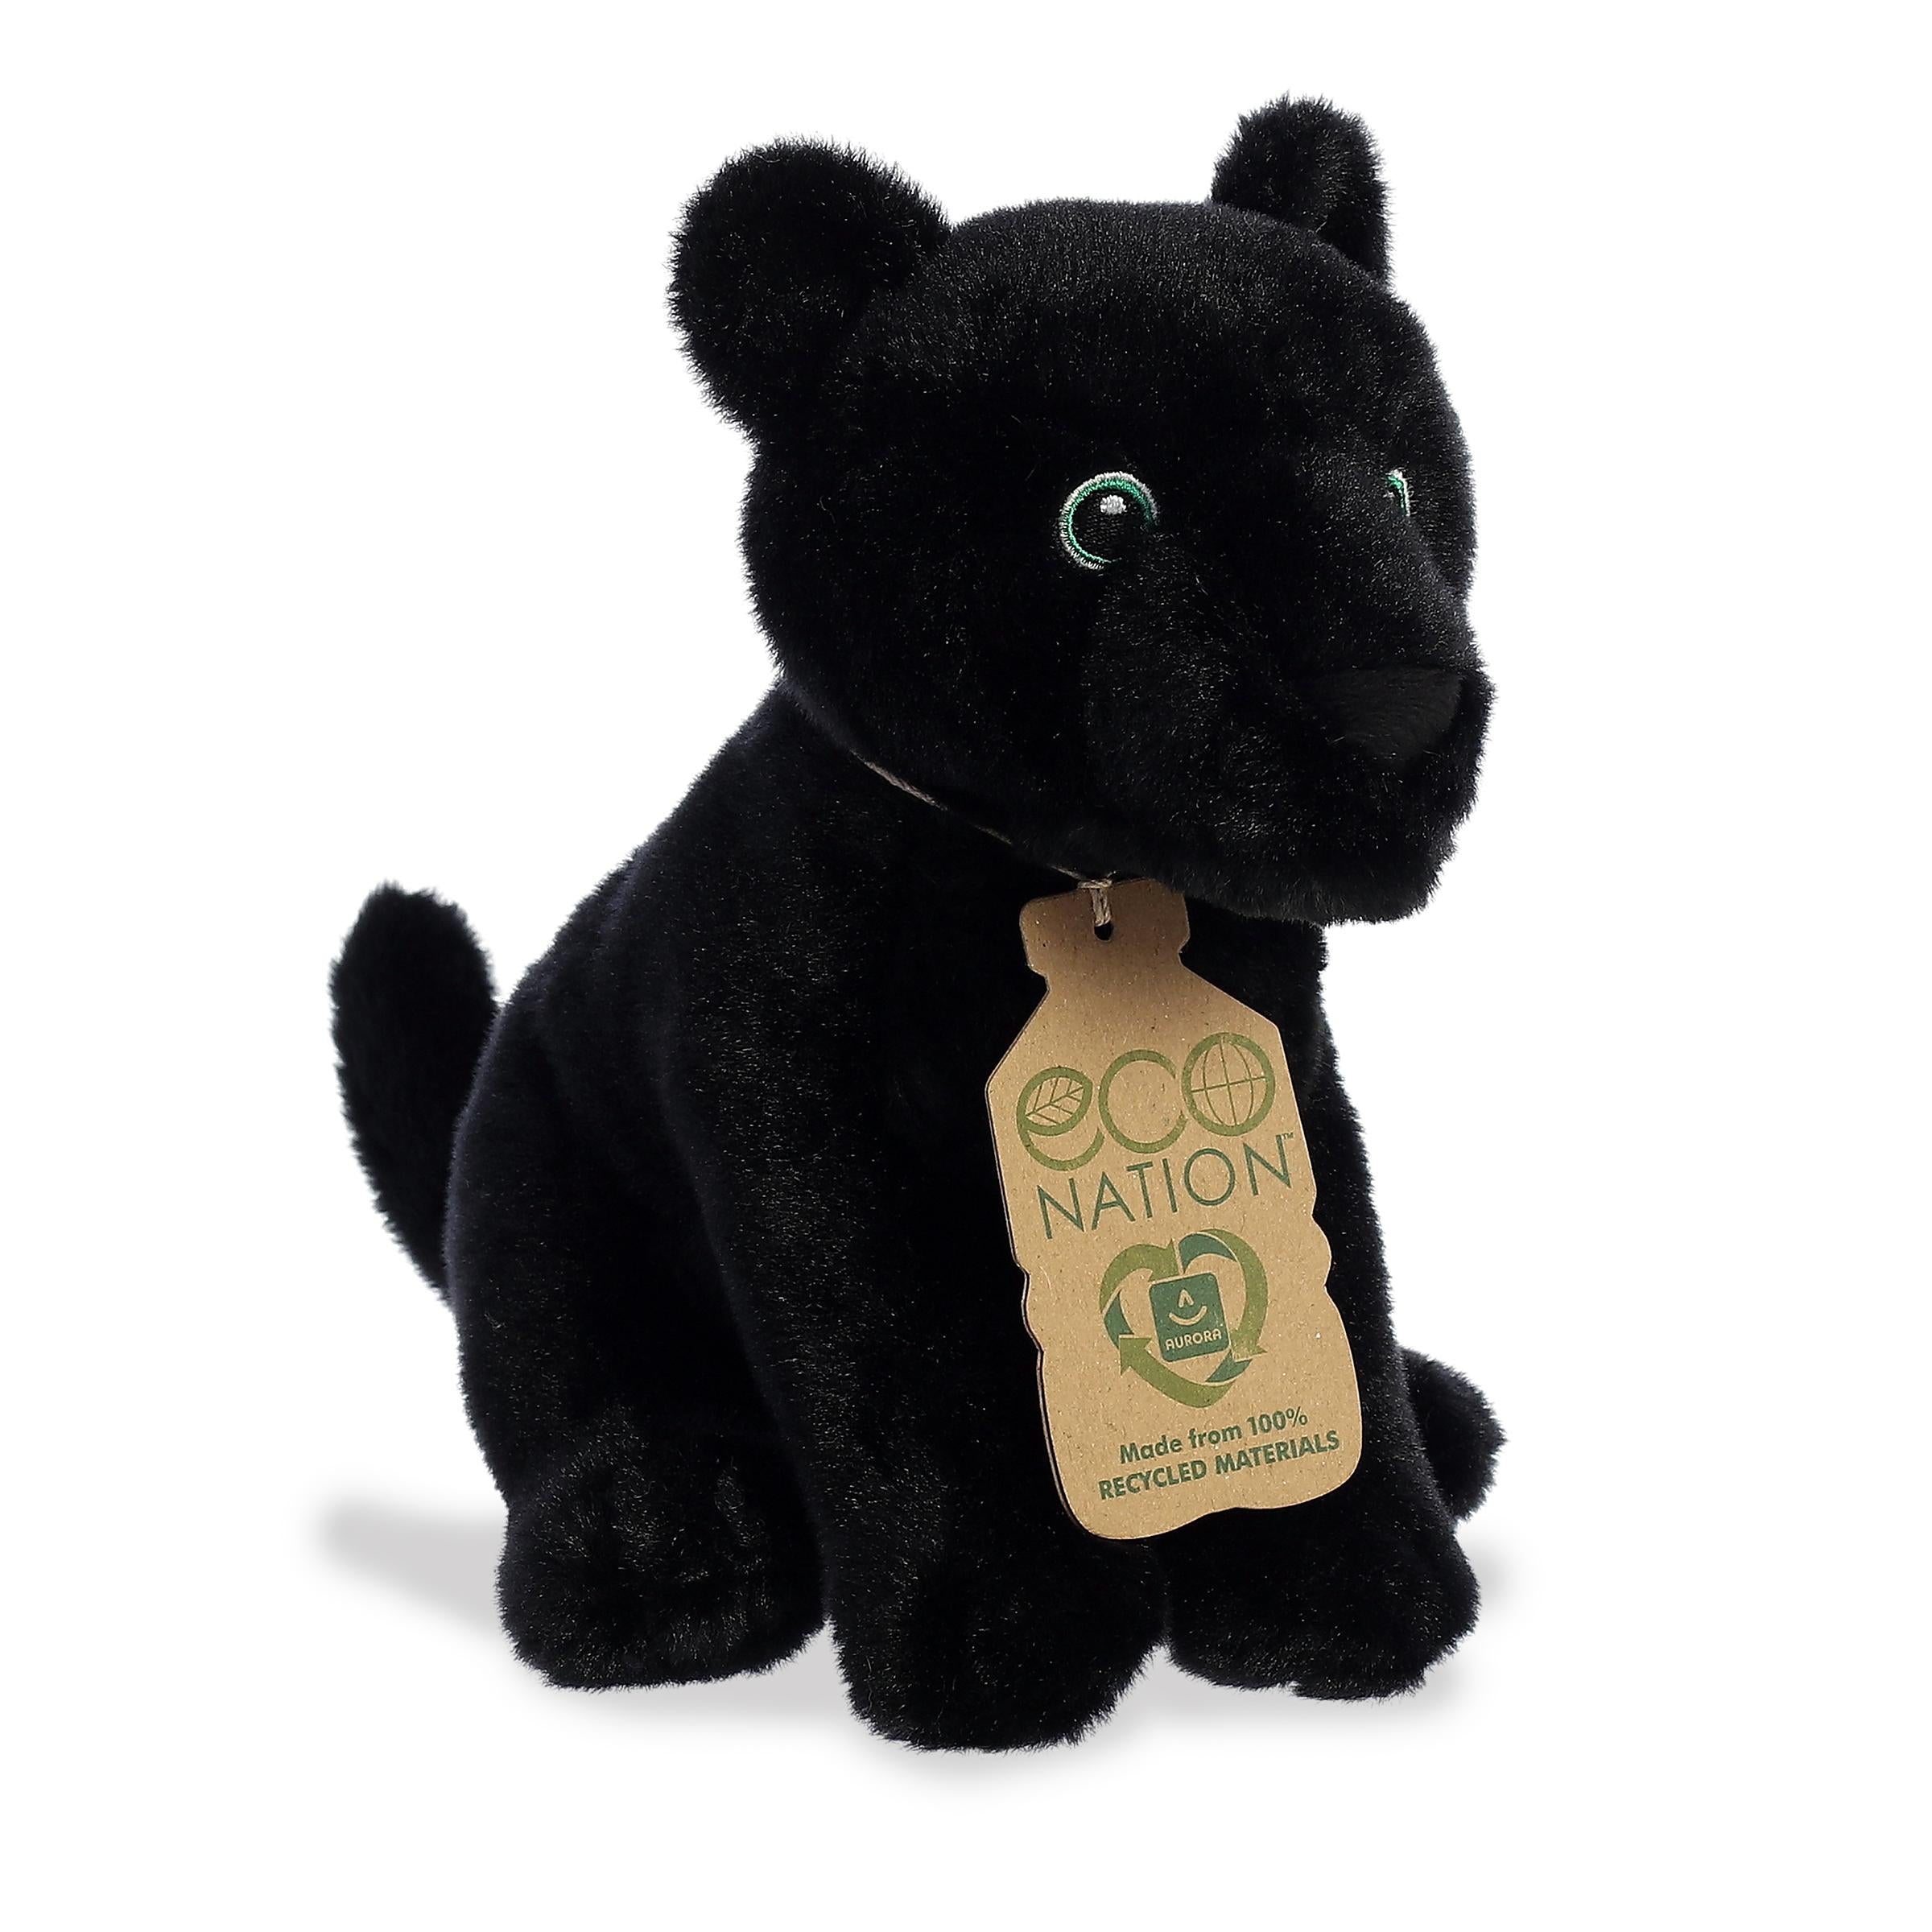 Enchanting panther plush with midnight fur and piercing green embroidered eyes, and an eco-nation tag hanging from its neck